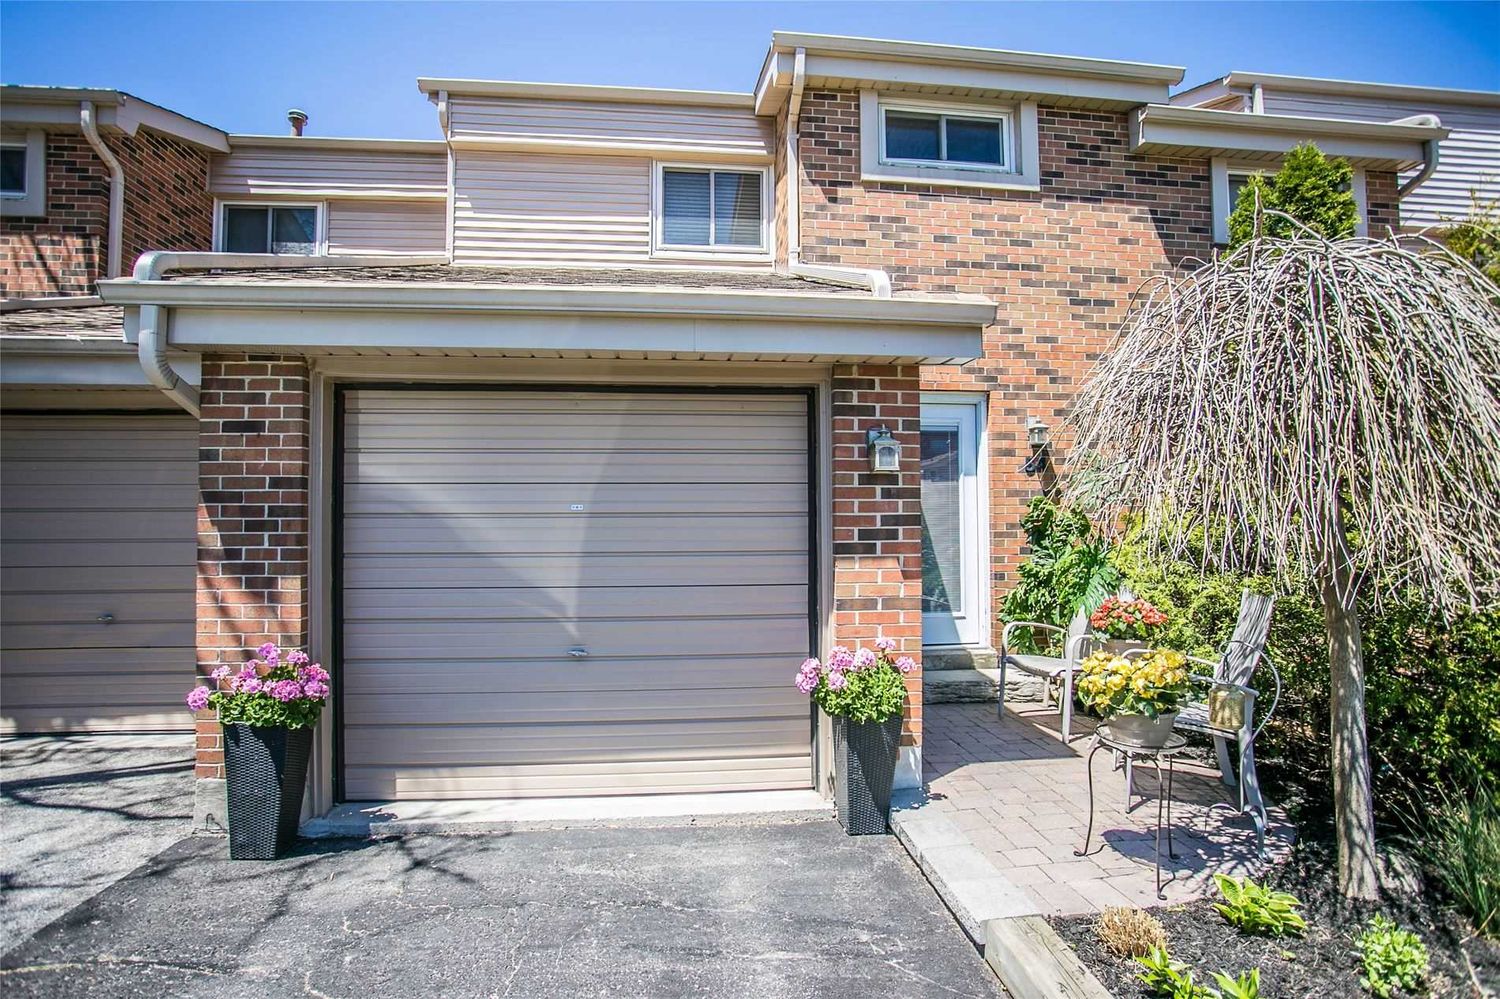 2755 Windwood Drive. 2755 Windwood Drive Townhomes is located in  Mississauga, Toronto - image #2 of 2